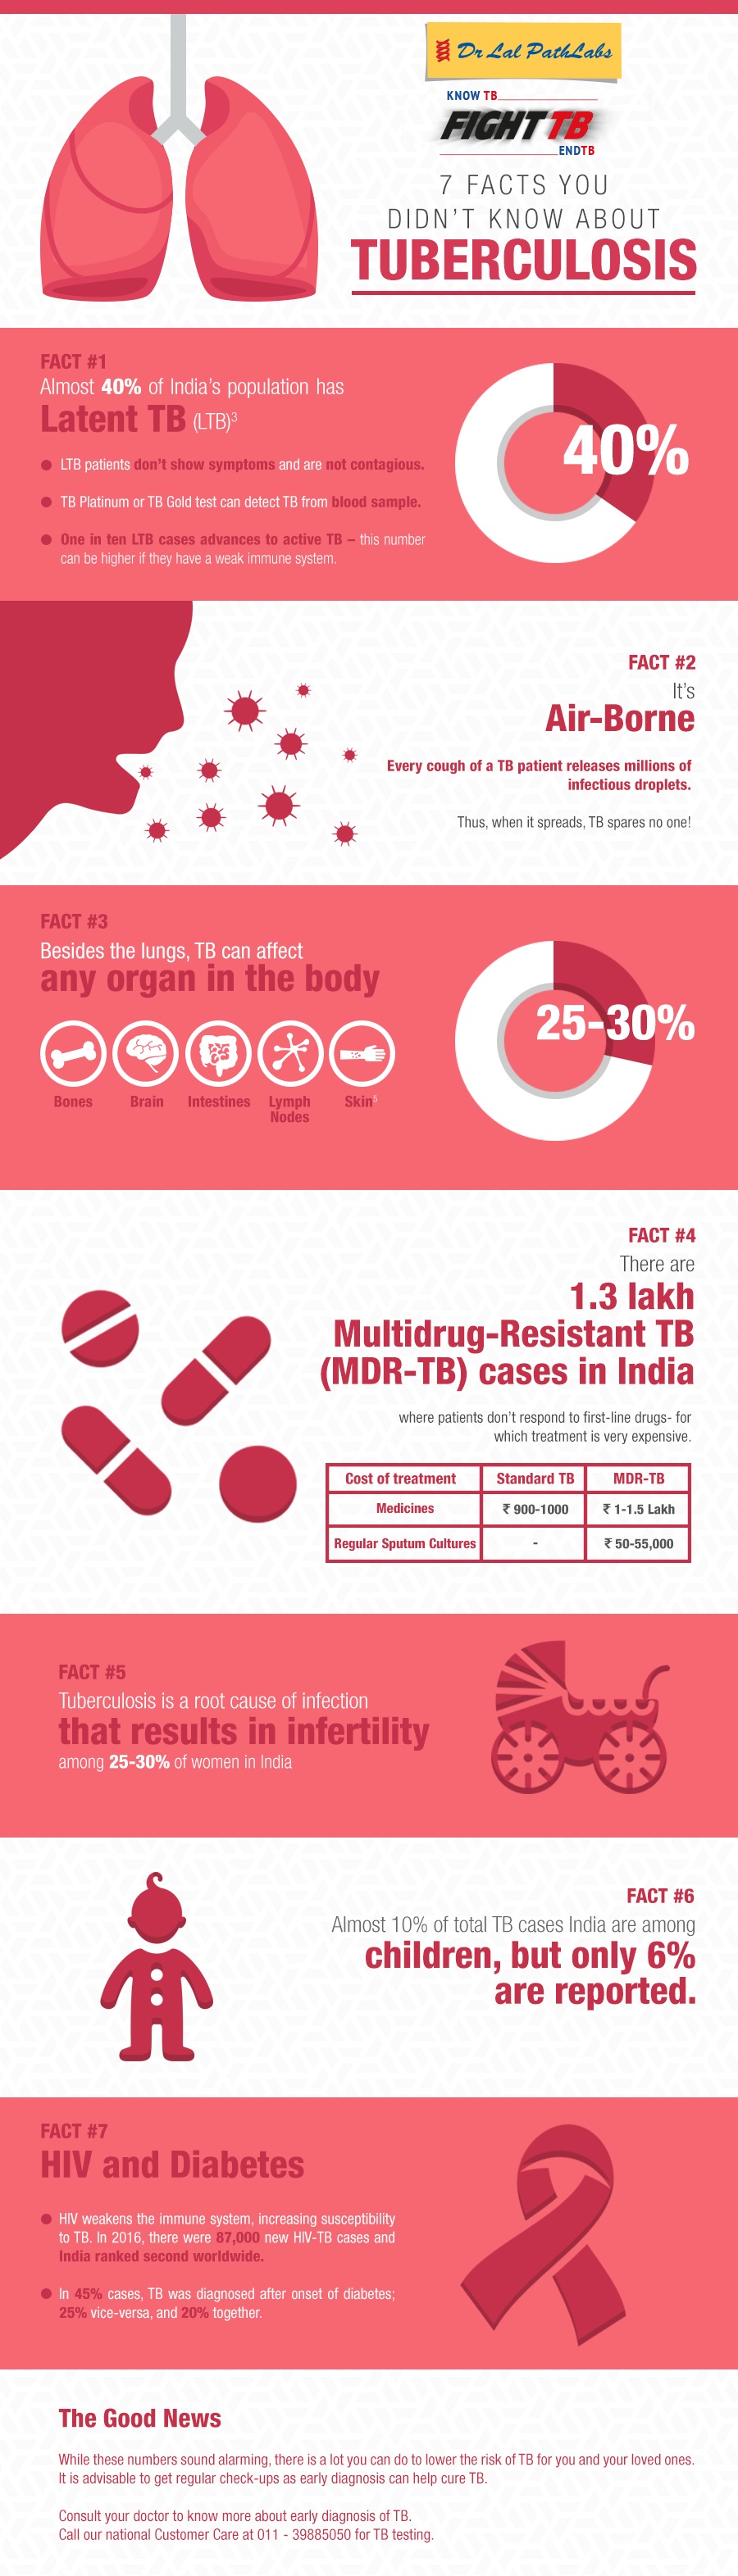 7 Facts About Tuberculosis (TB)